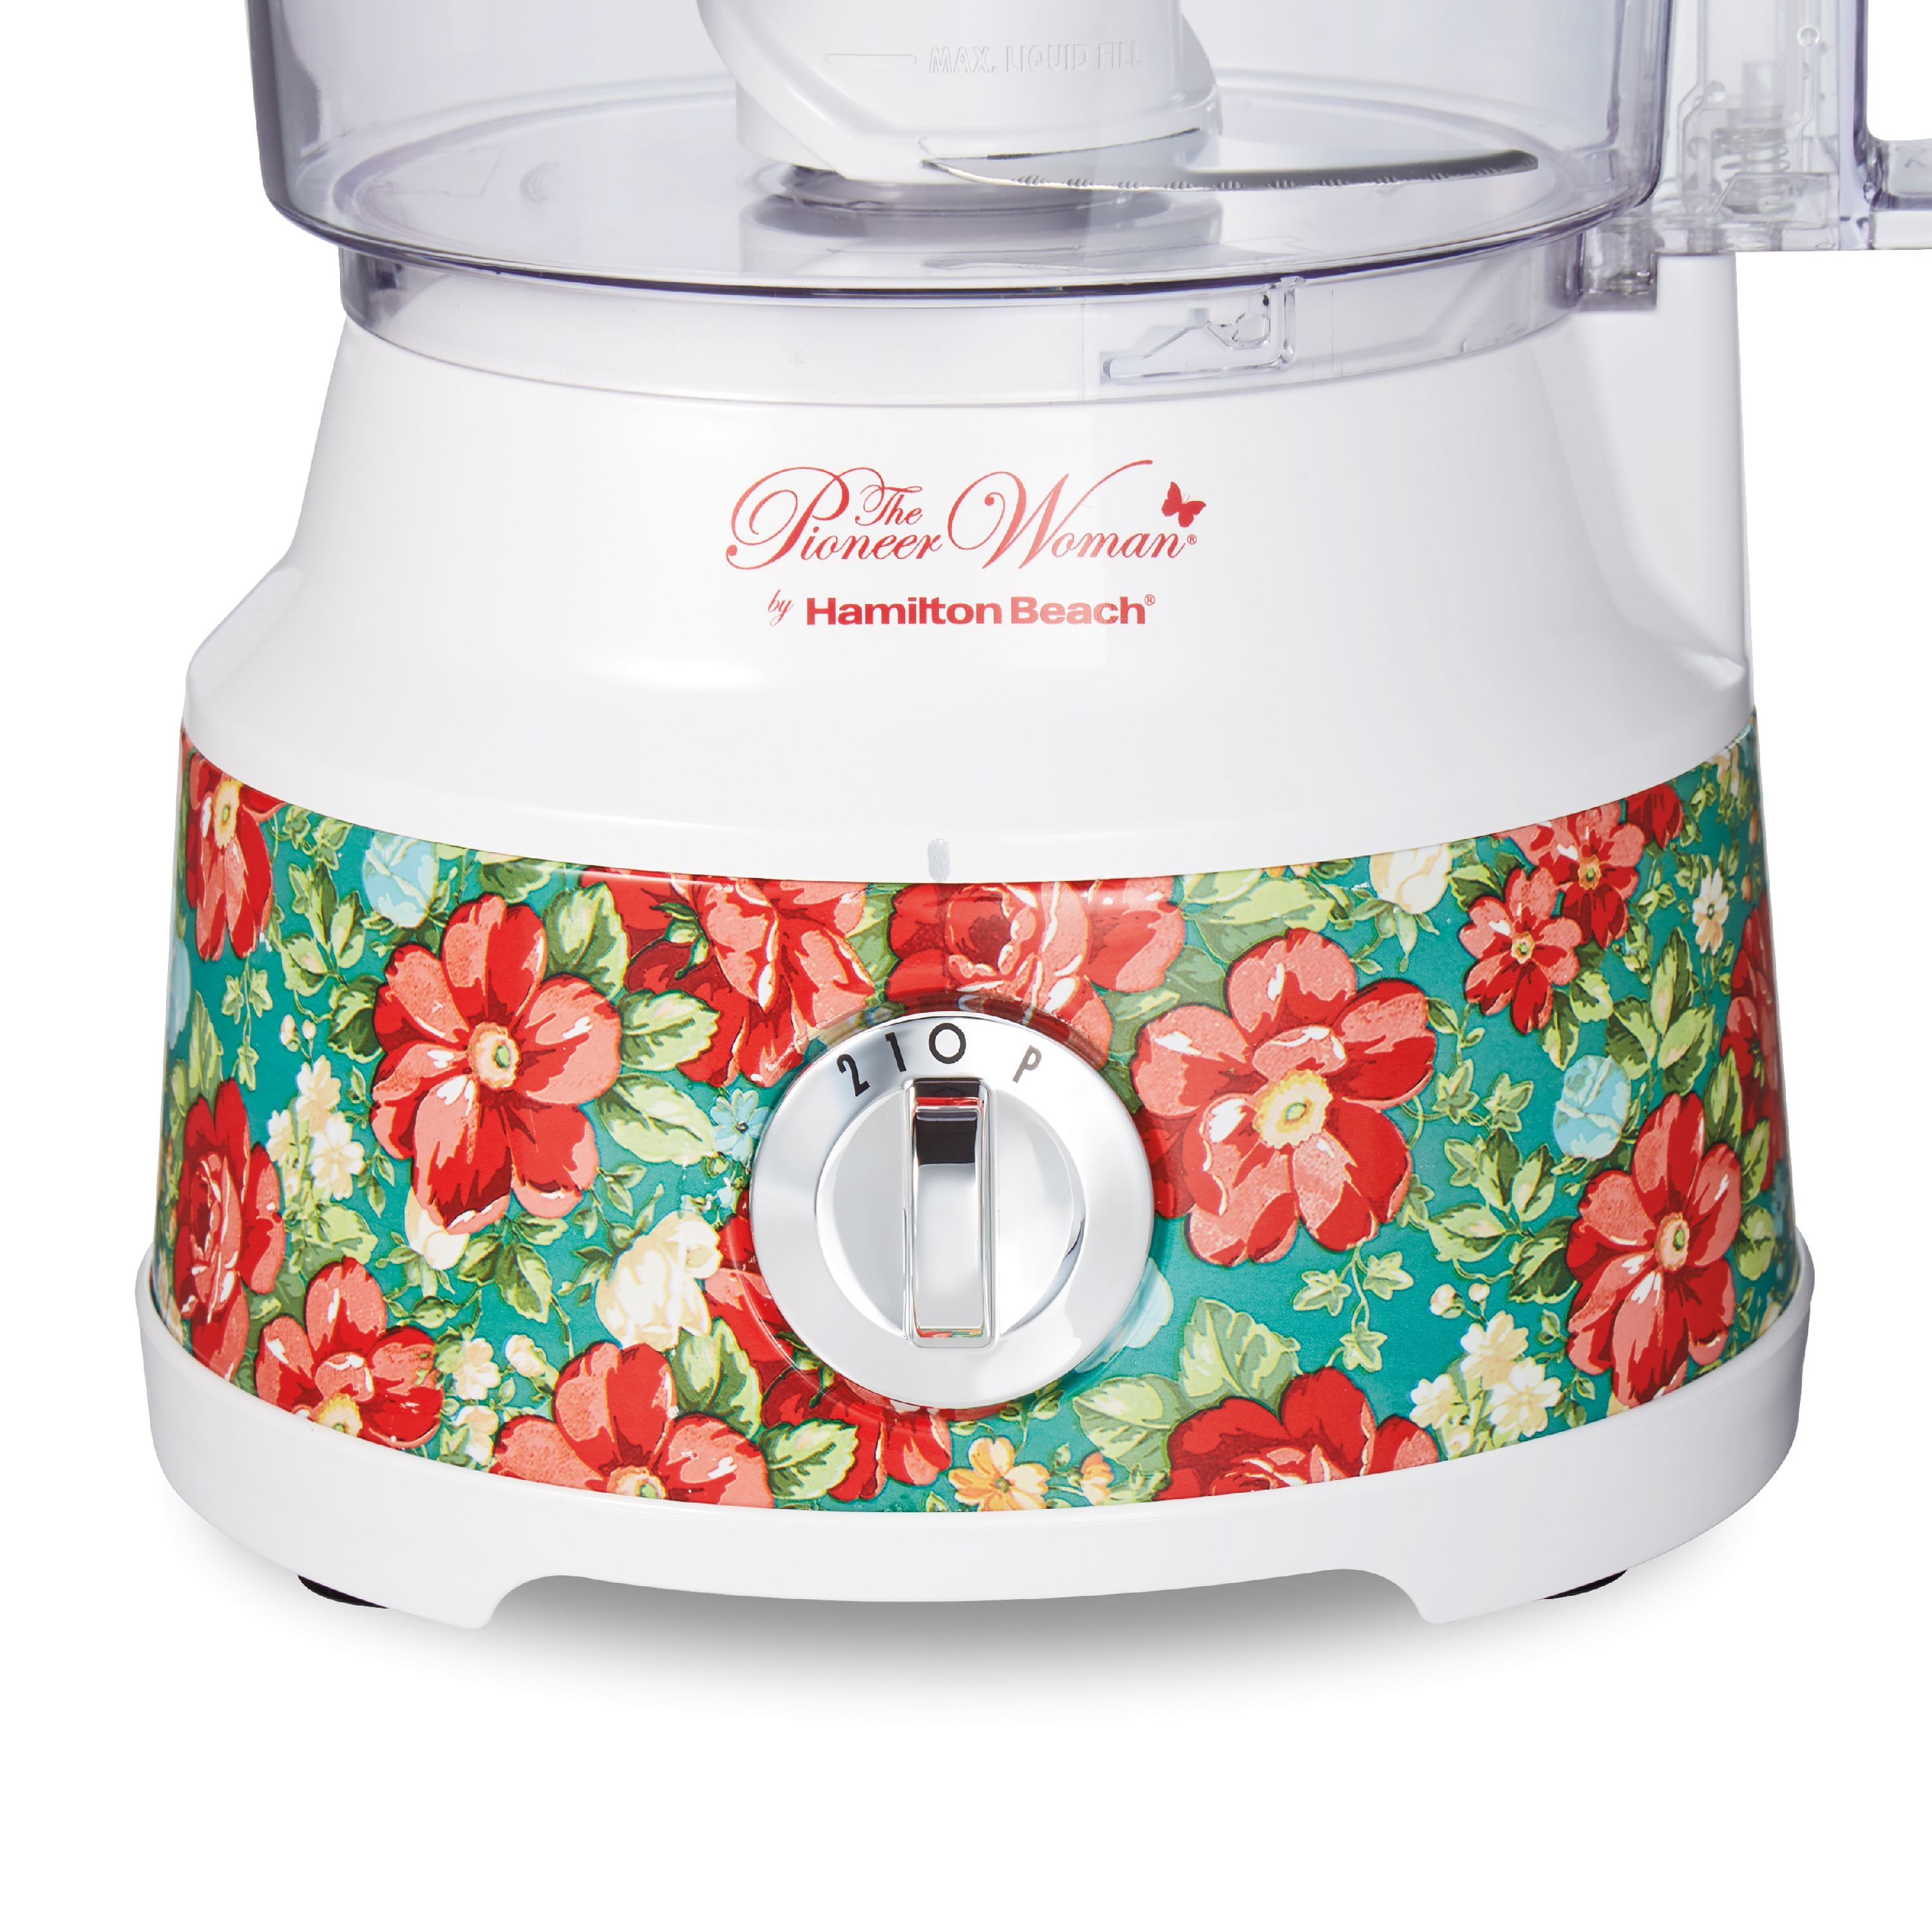 Pioneer Woman Food Processor with Bowl Scraper, 10 Cup, Large Feed Chute, Stainless Steel Blades, Vintage Floral, 70731 - image 5 of 7